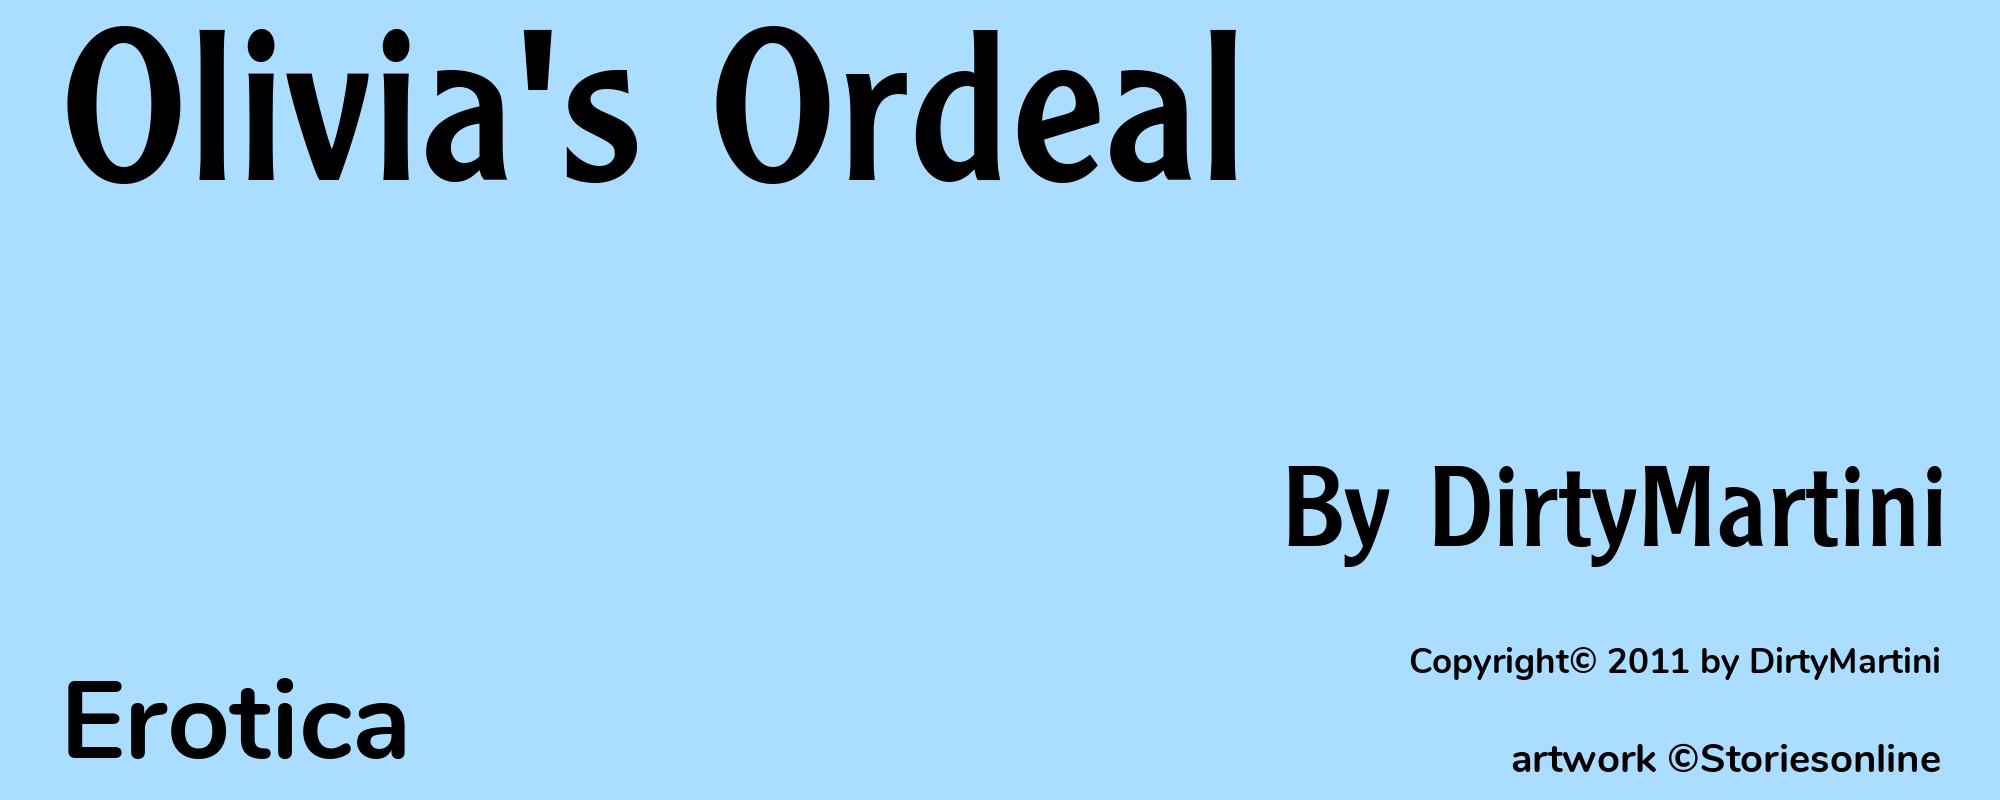 Olivia's Ordeal - Cover